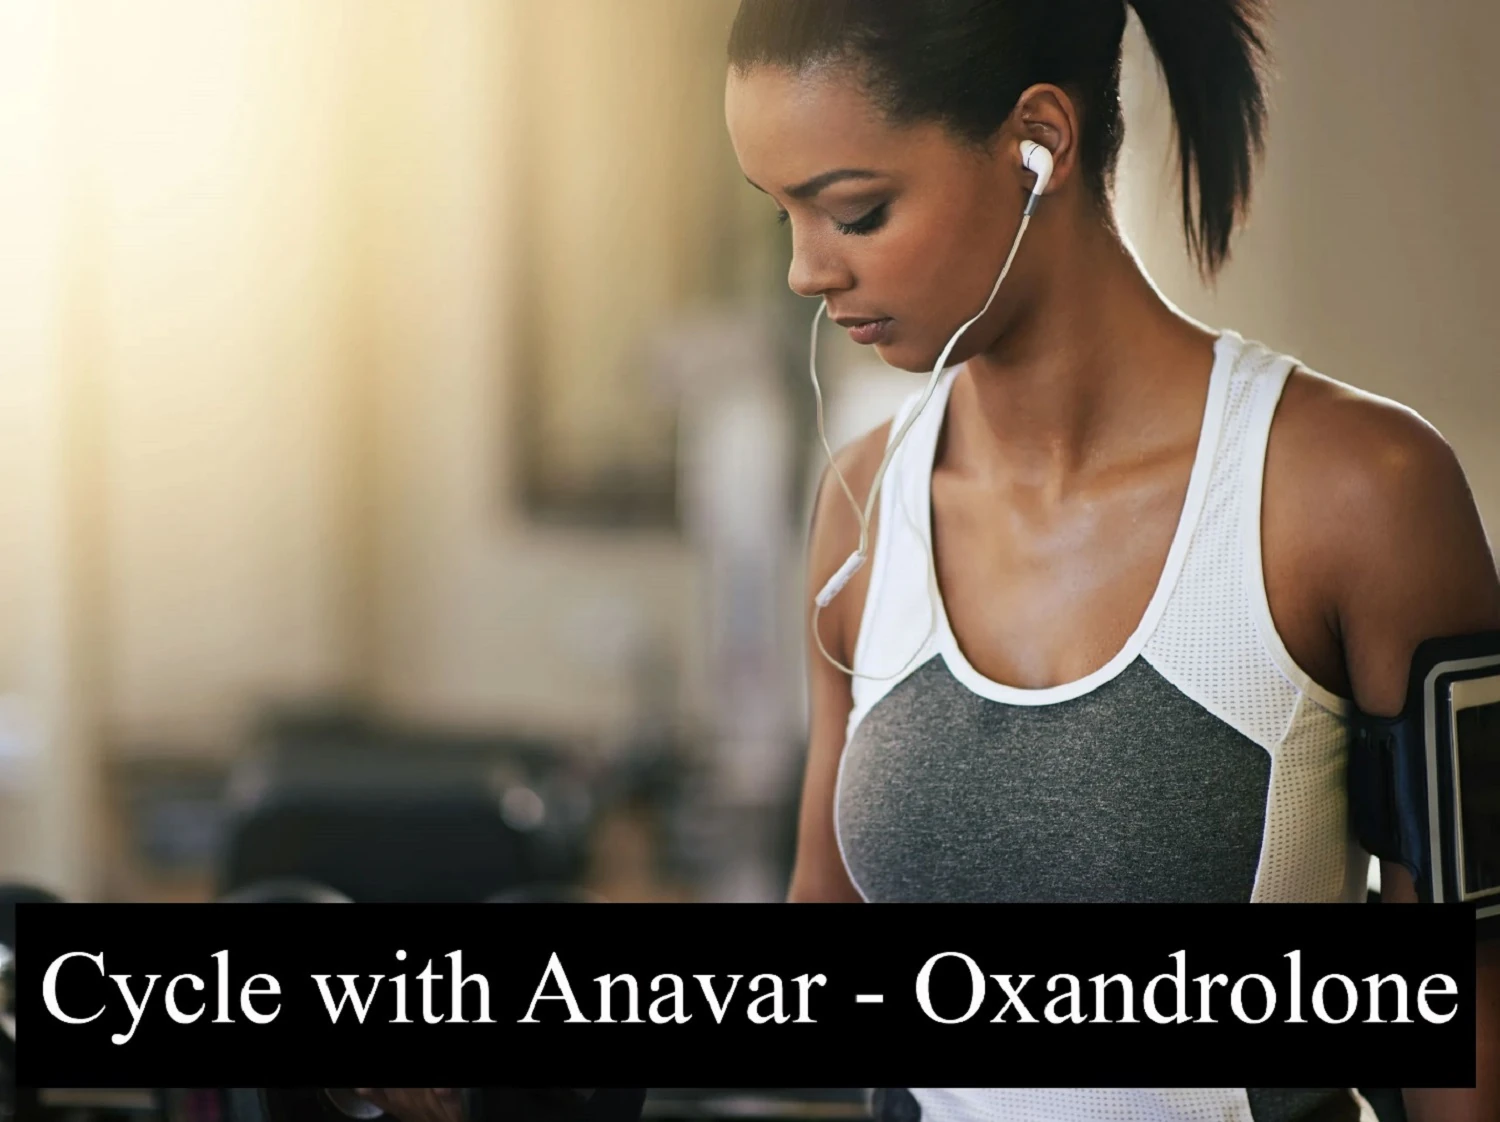 Cycle with Anavar